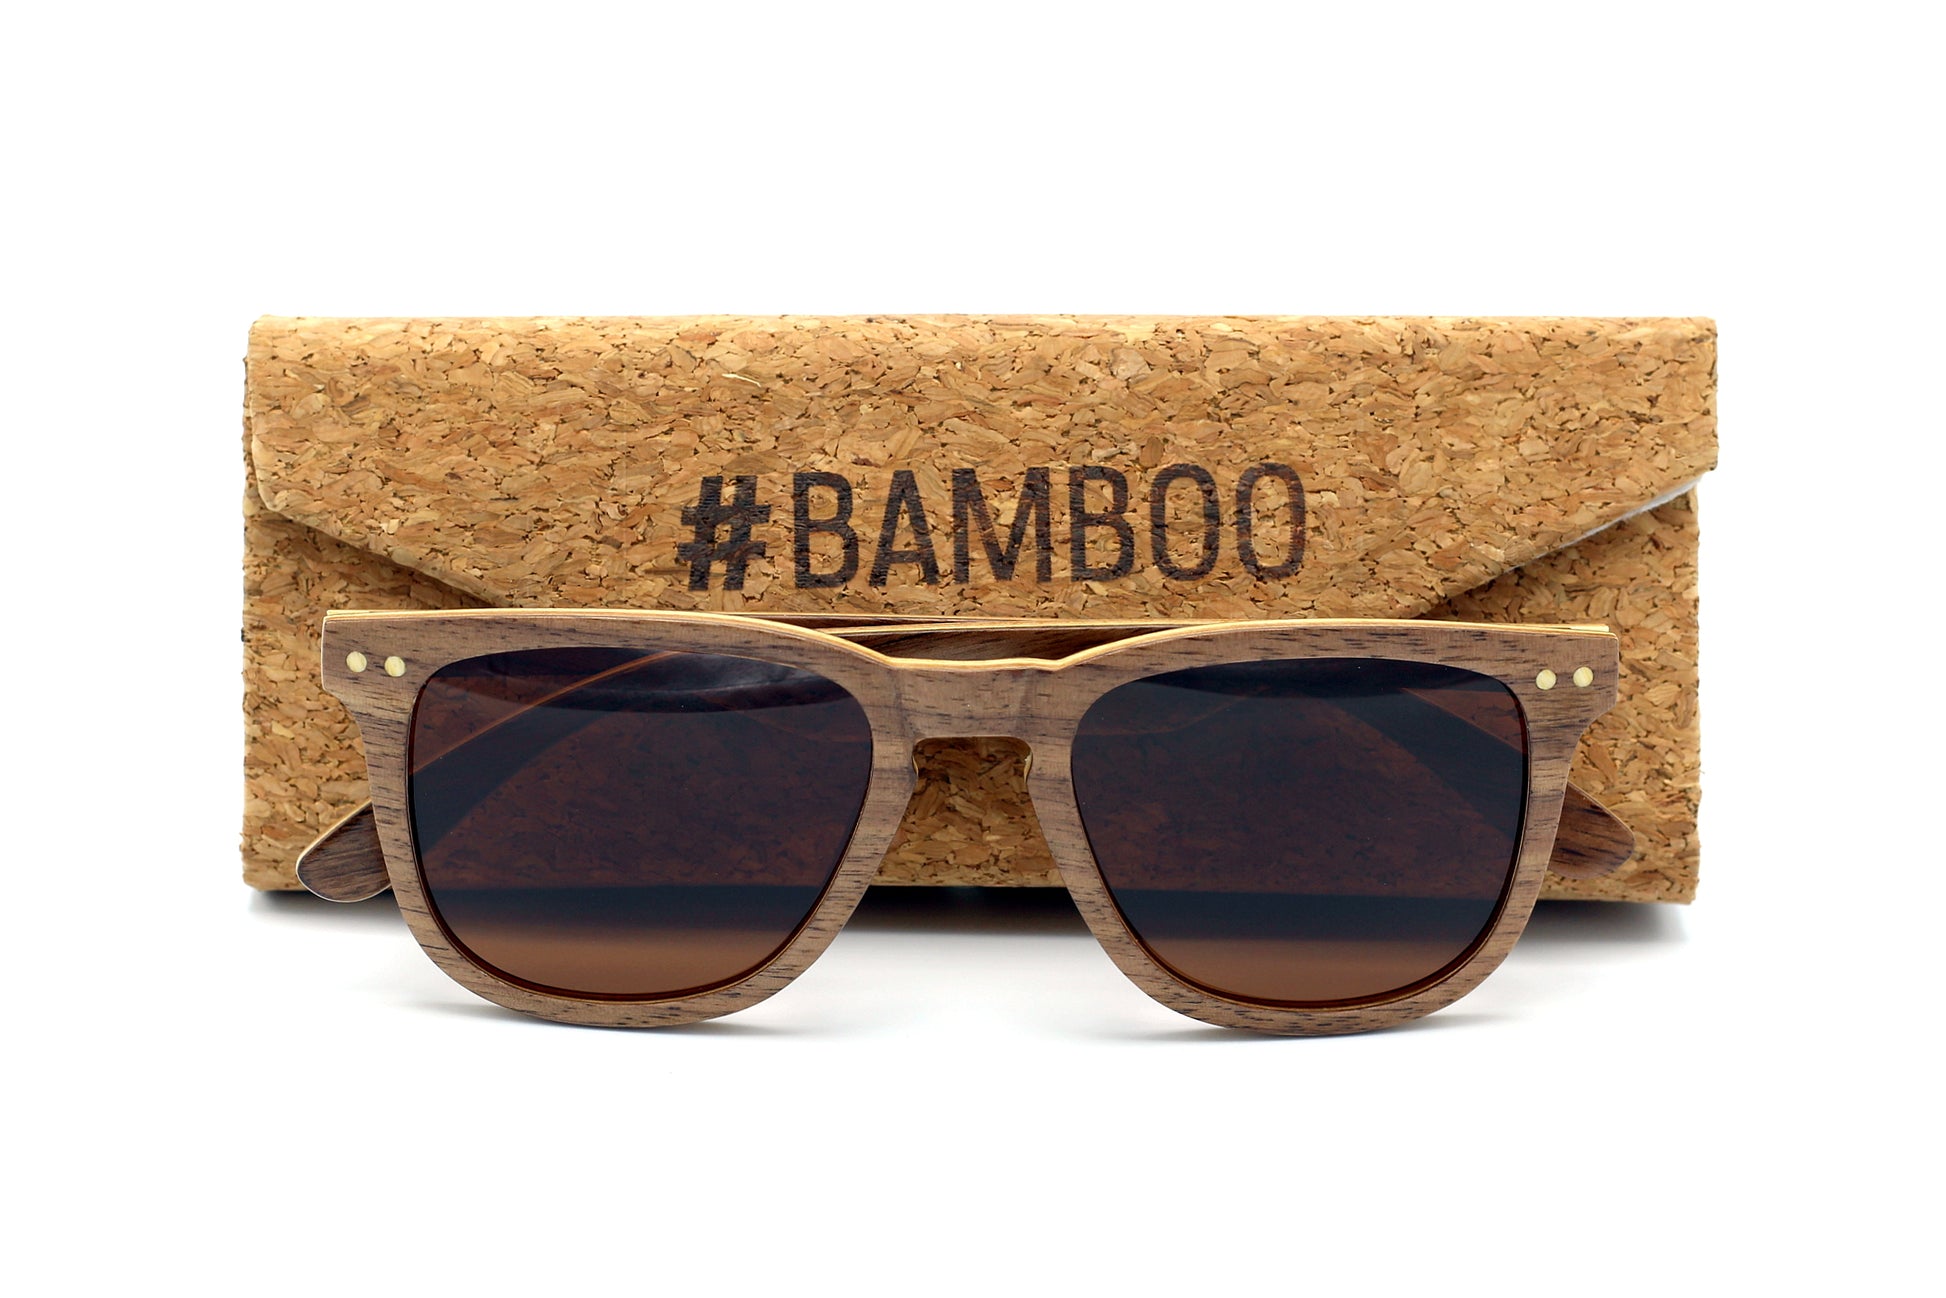 SOLID WOOD Ladies Sunglasses Walnut with Brown Polarised Lens - THE FLARE - Hashtag Bamboo